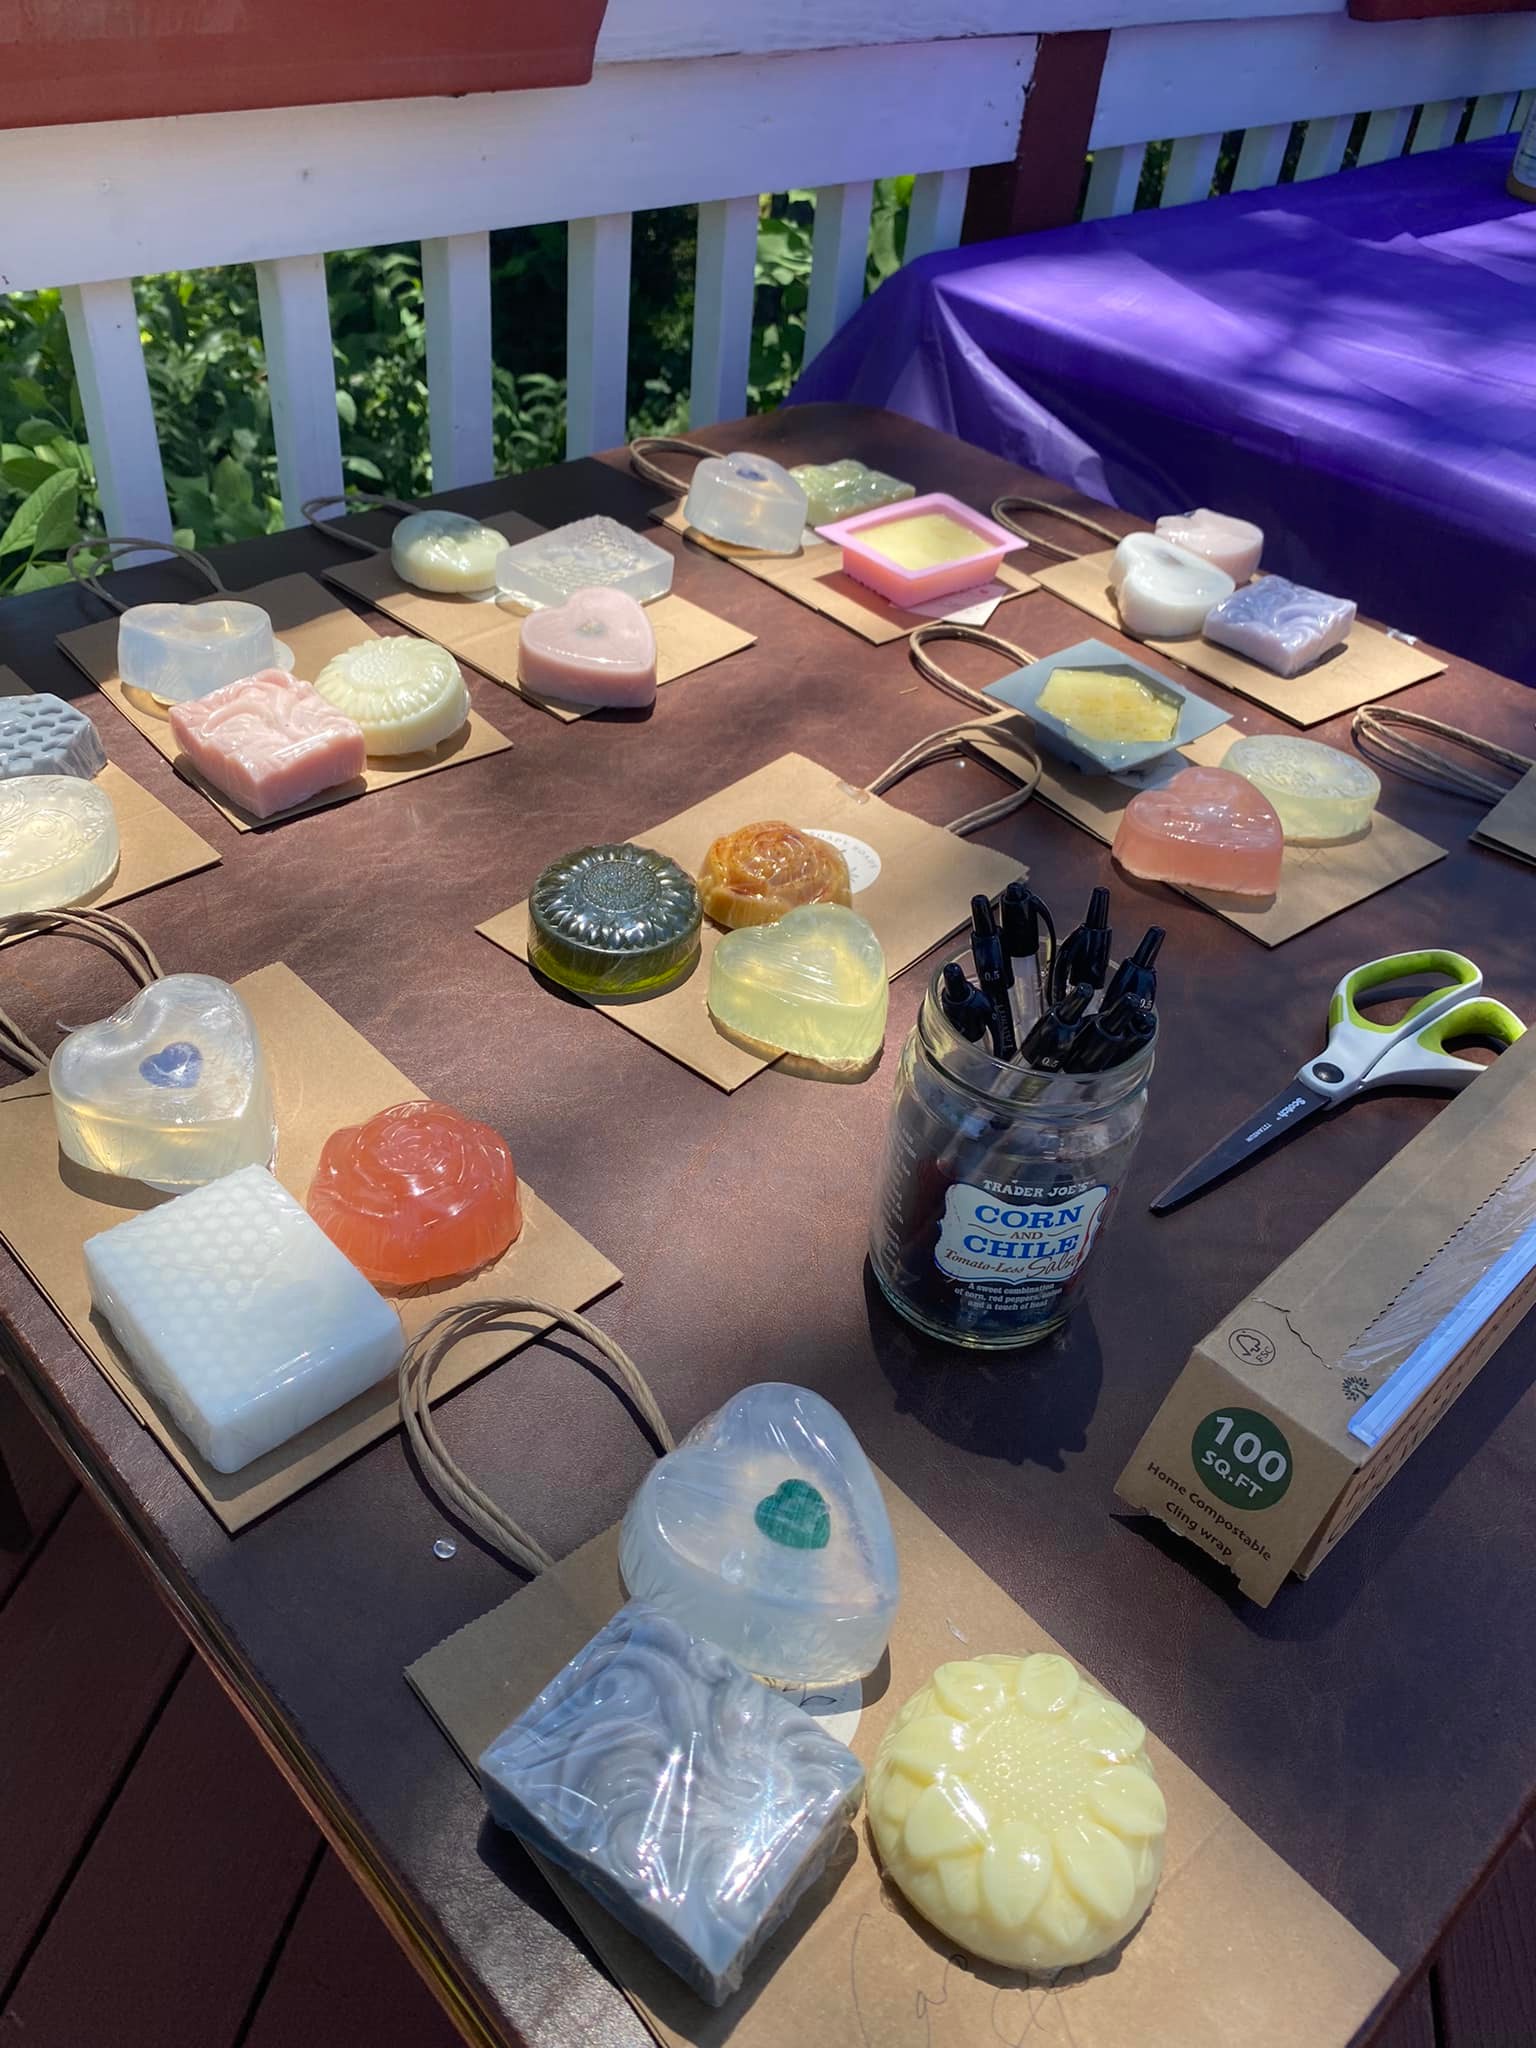 Variety of bar soaps laid out on a table along with soap making supplies. 